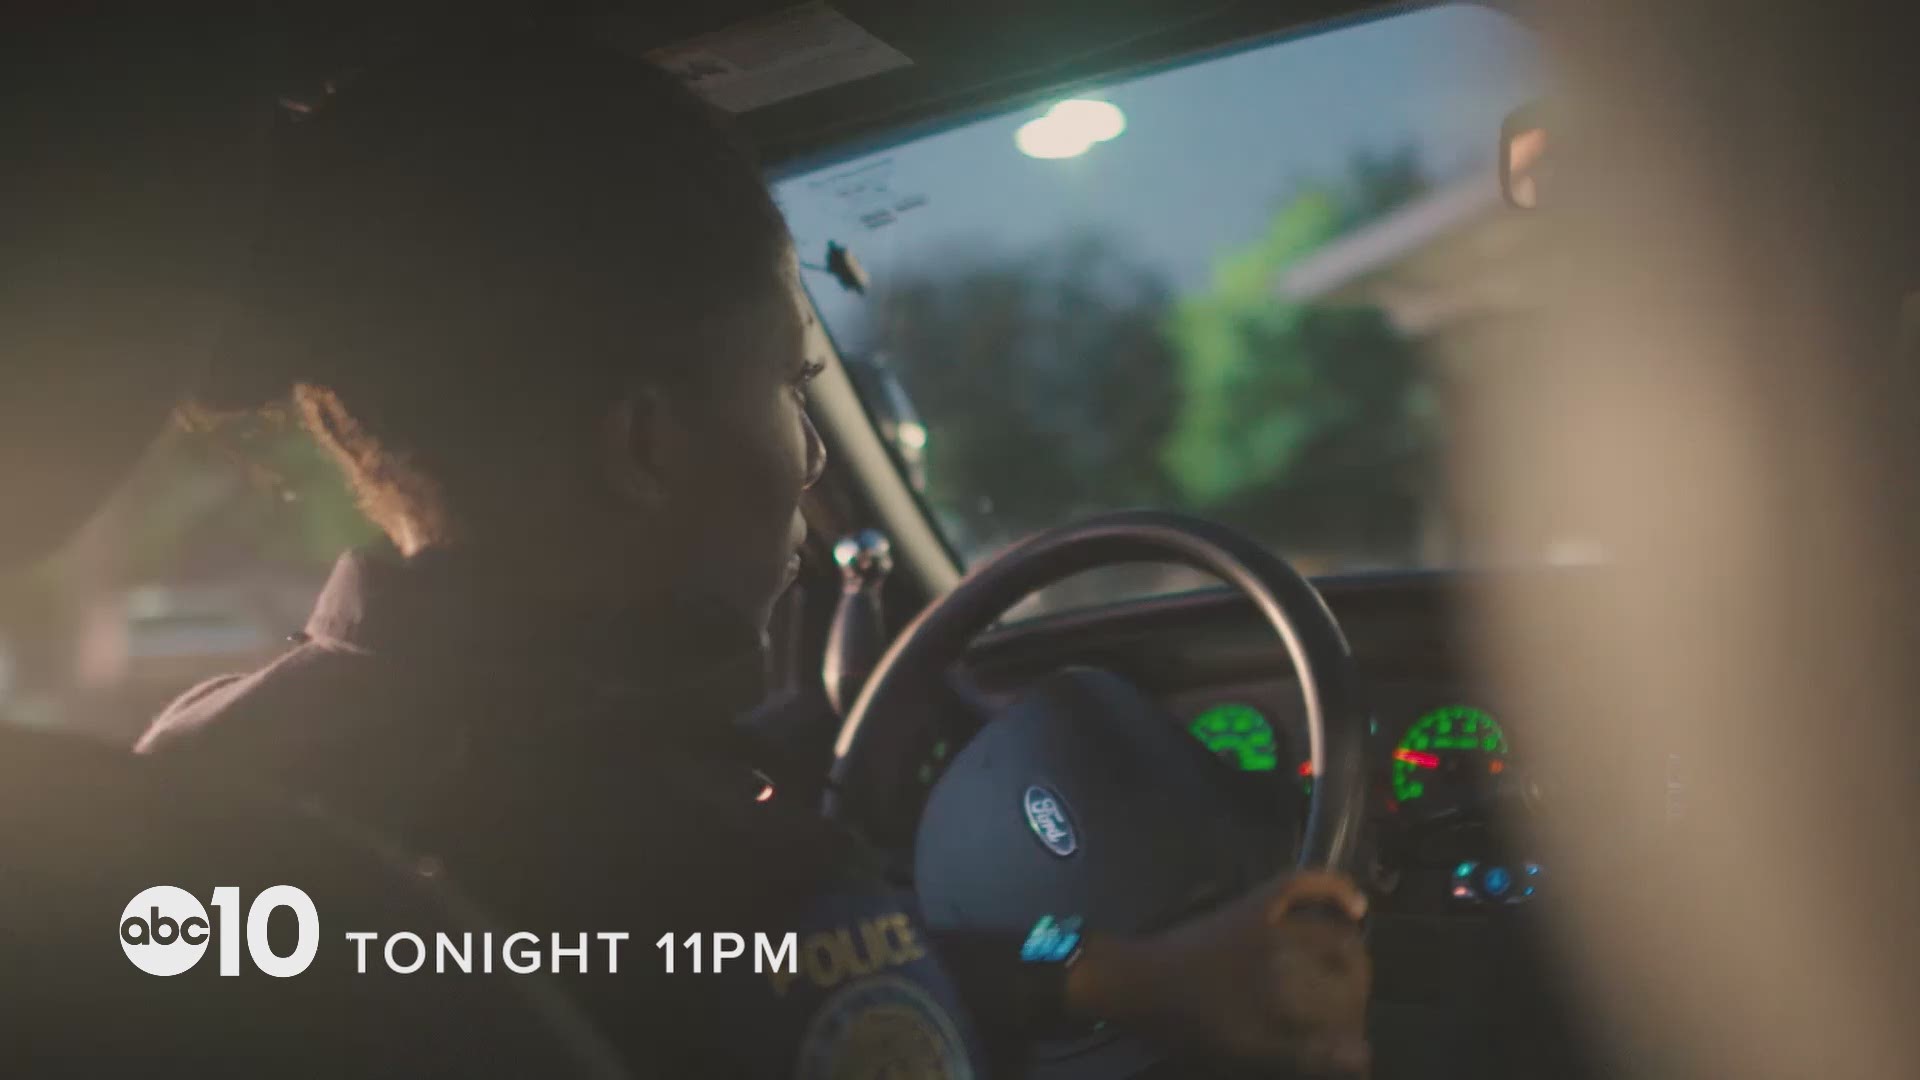 ABC10 in-depth: Watch Wednesday night on LNT at 11 as we follow rookie SPD officer Berlinda Cato to understand what it's like on the job as a new cop.